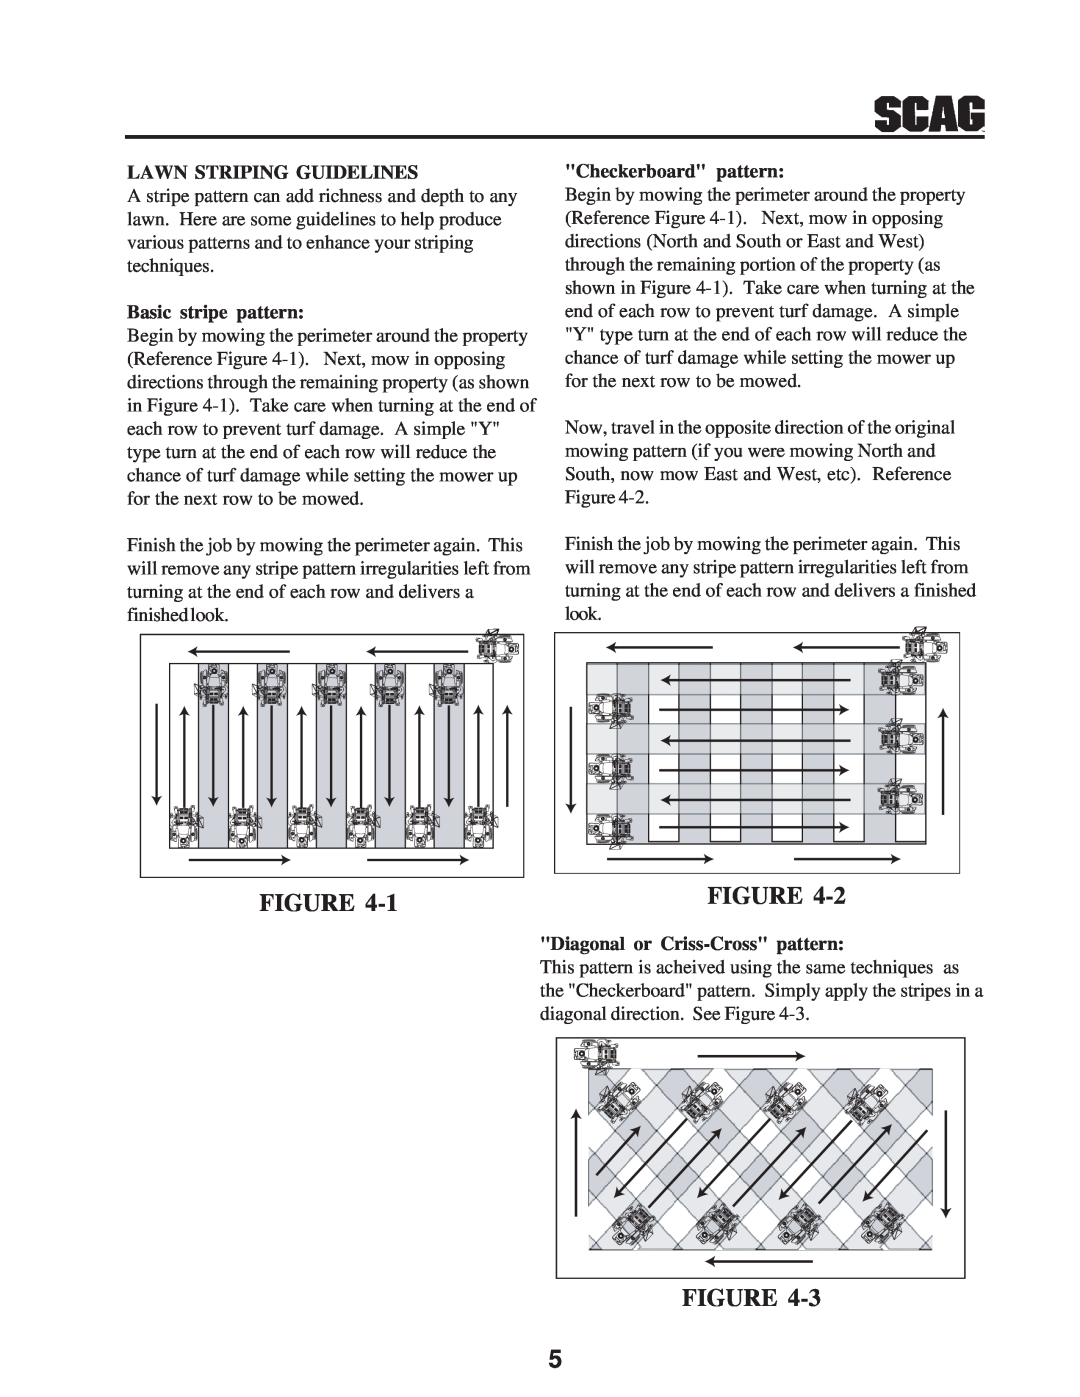 Scag Power Equipment 7630001 manual Lawn Striping Guidelines, Basic stripe pattern, Checkerboard pattern 